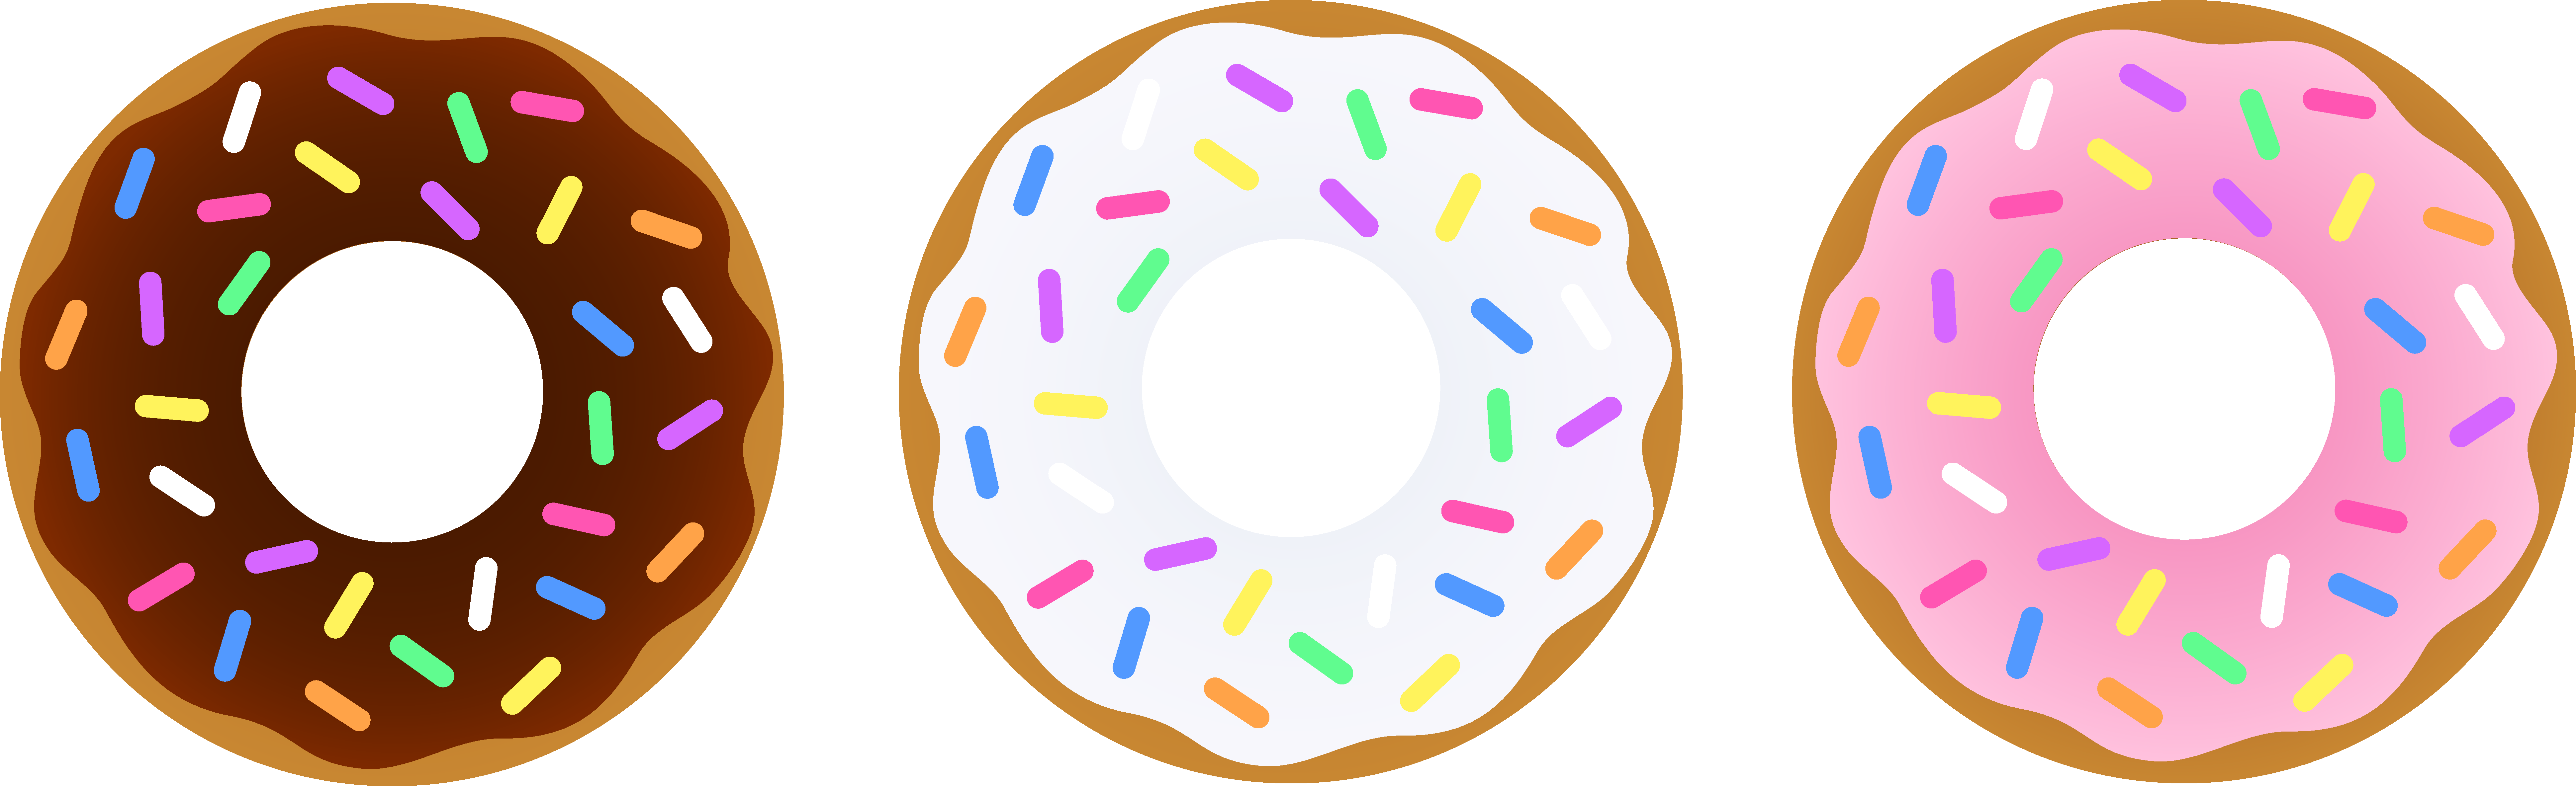 Donuts and Coffee Clipart Dig